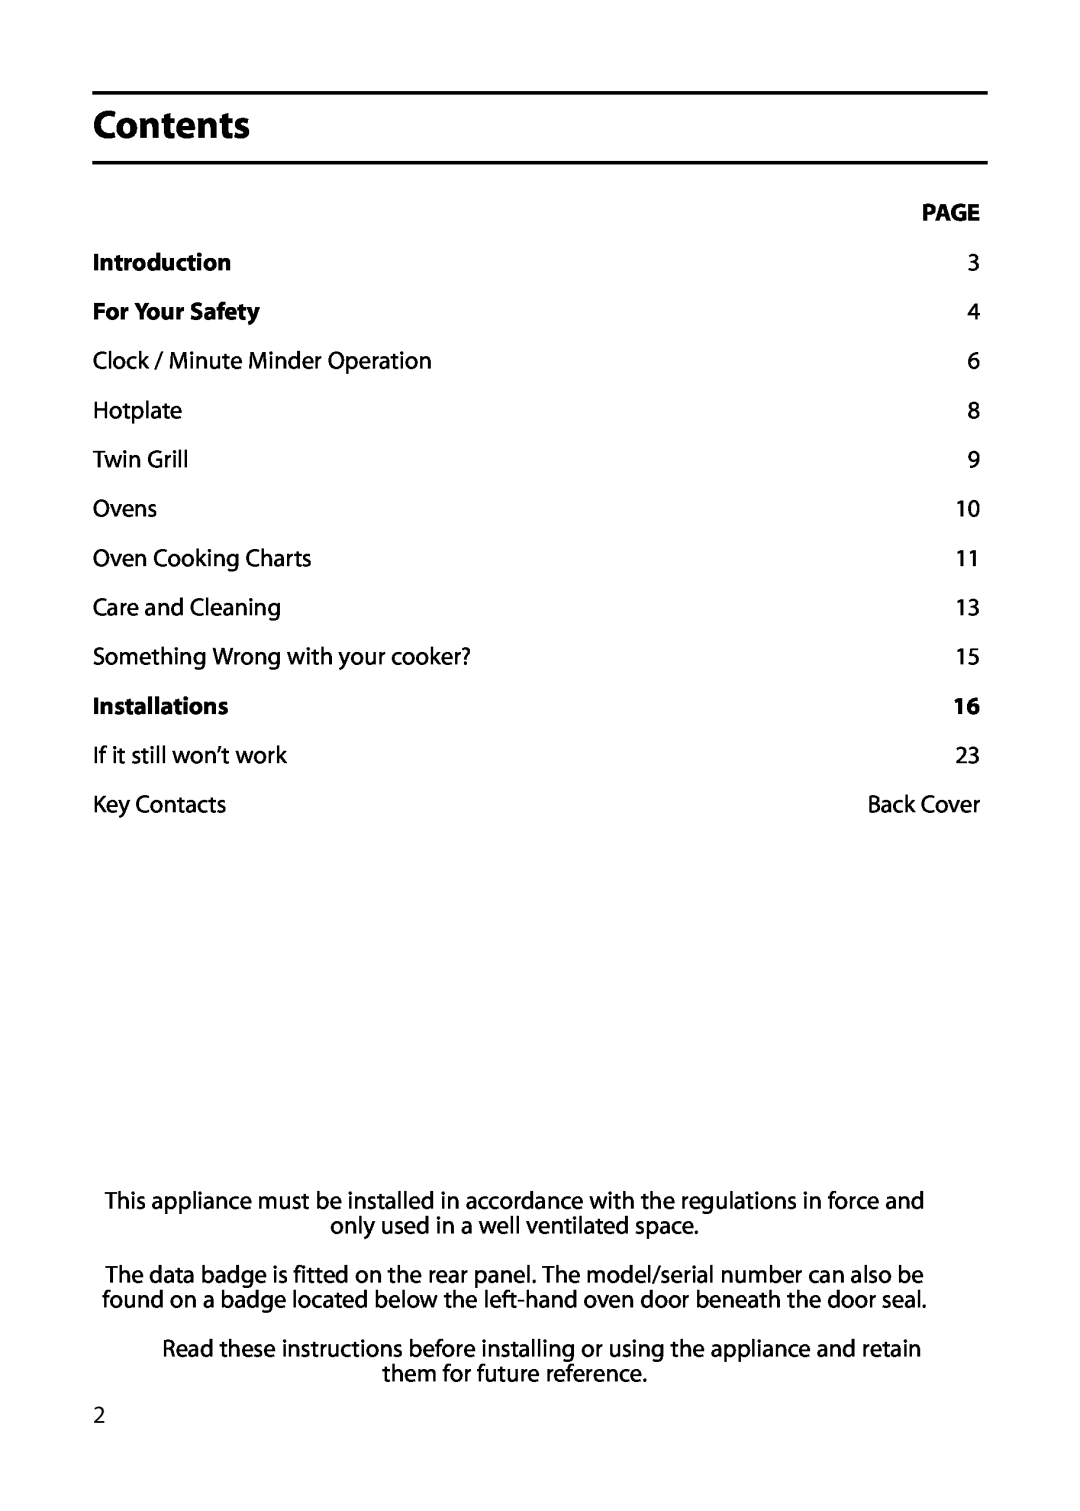 Indesit KP100IX manual Contents, Page, Introduction, For Your Safety, Installations 